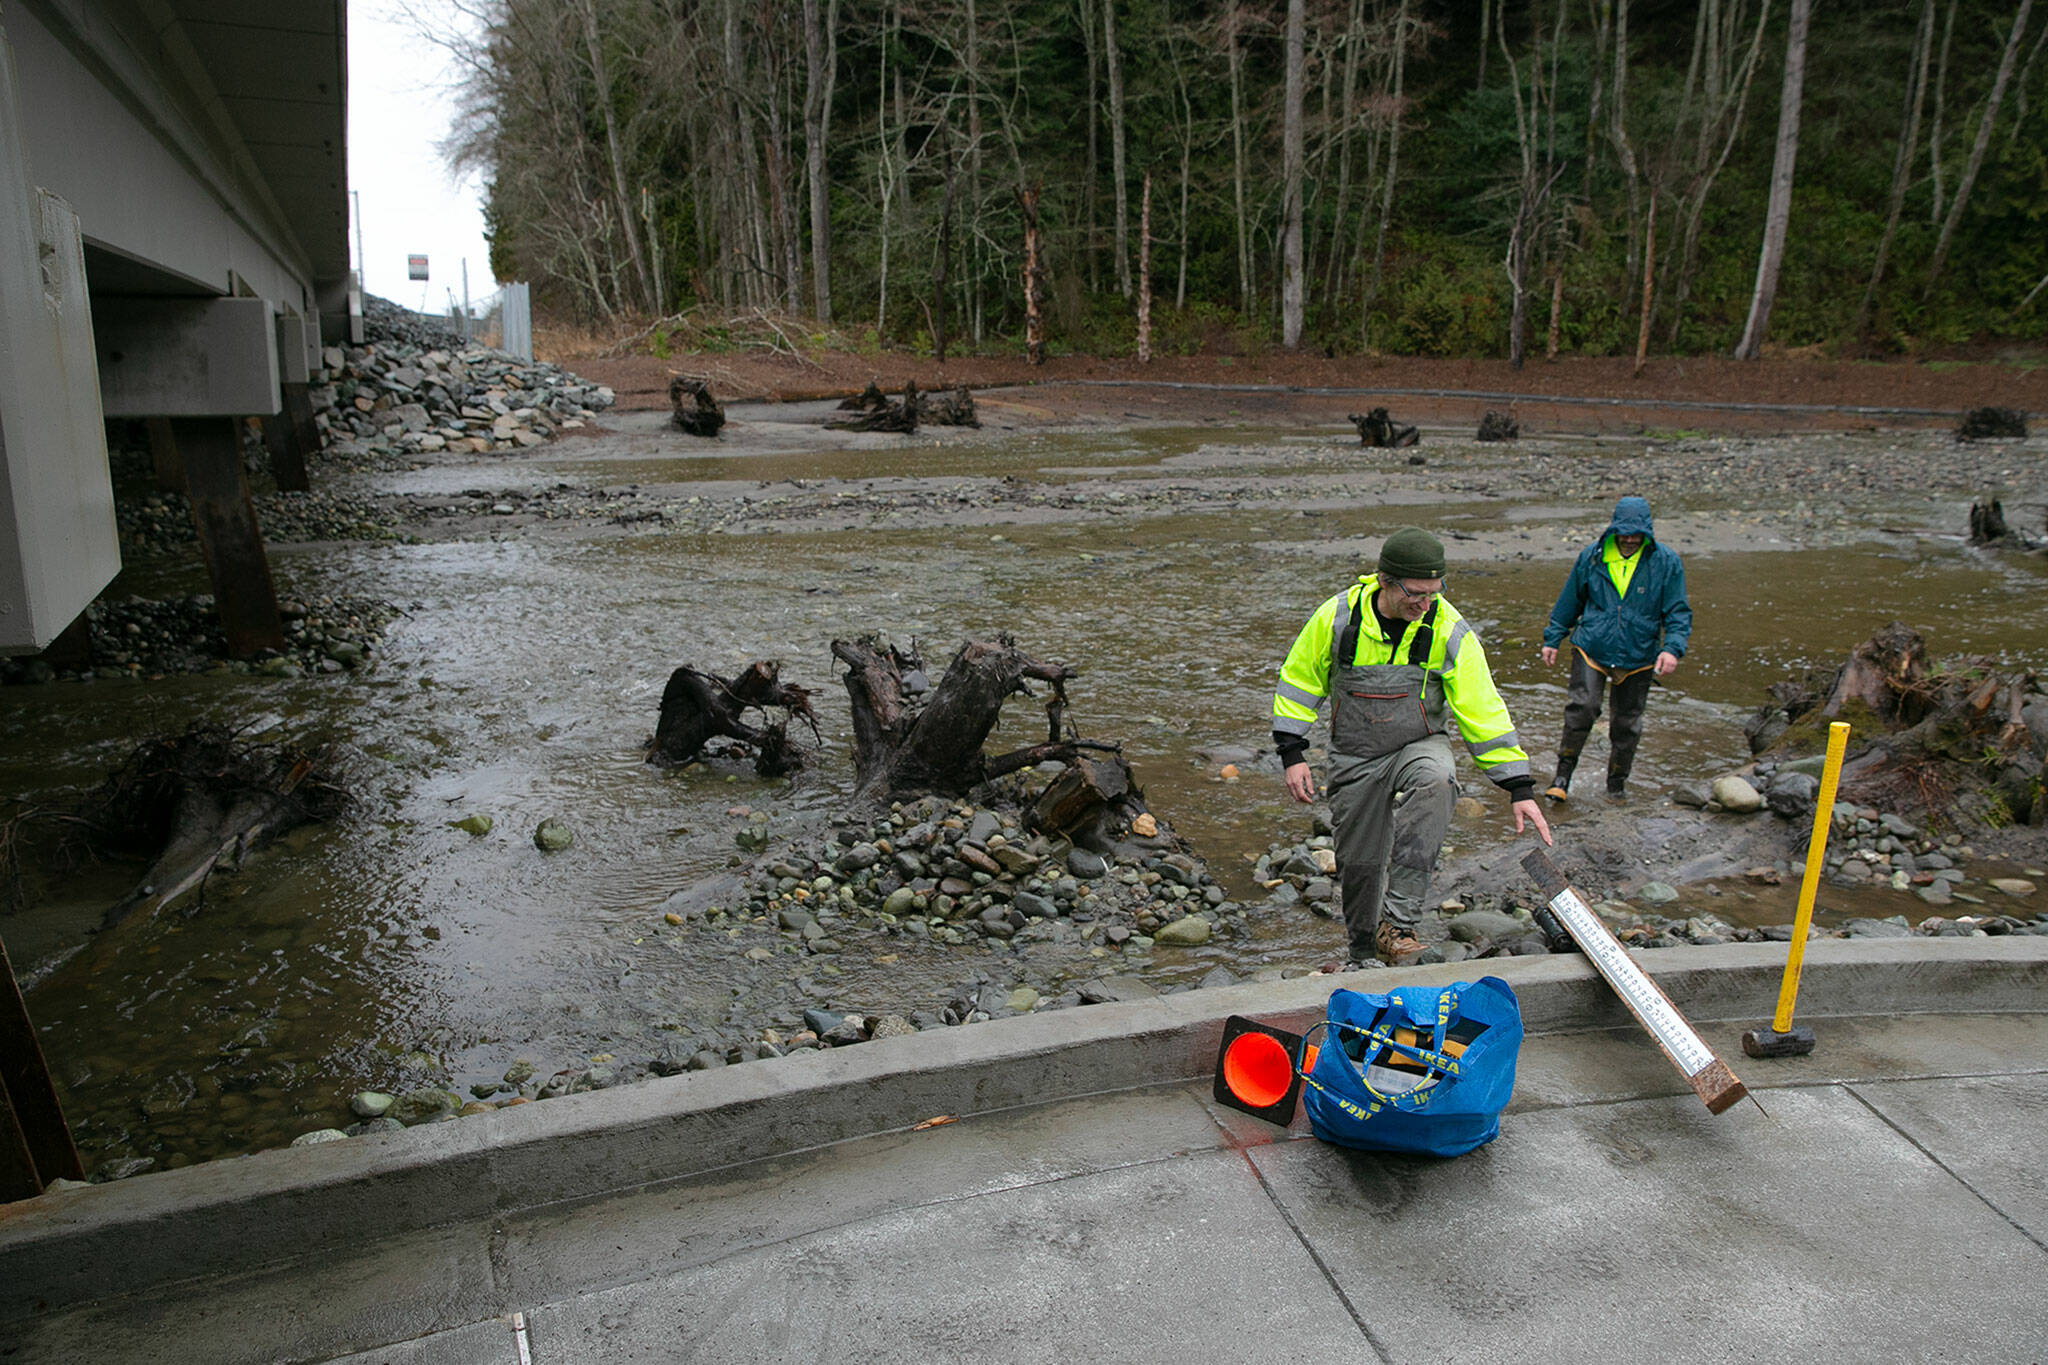 John Herrmann and Keith Hume, both of the Surface Water Management team at the Snohomish County Department of Conservation and Natural Resources, prepare to install a staff gauge at the mouth of Lunds Gulch Creek at Meadowdale Beach Park on Jan. 12, in Edmonds. Part of the park’s redesign involved widening the waterway and returning it to a more natural state to provide better habitat for fish and other wildlife. (Ryan Berry / The Herald)